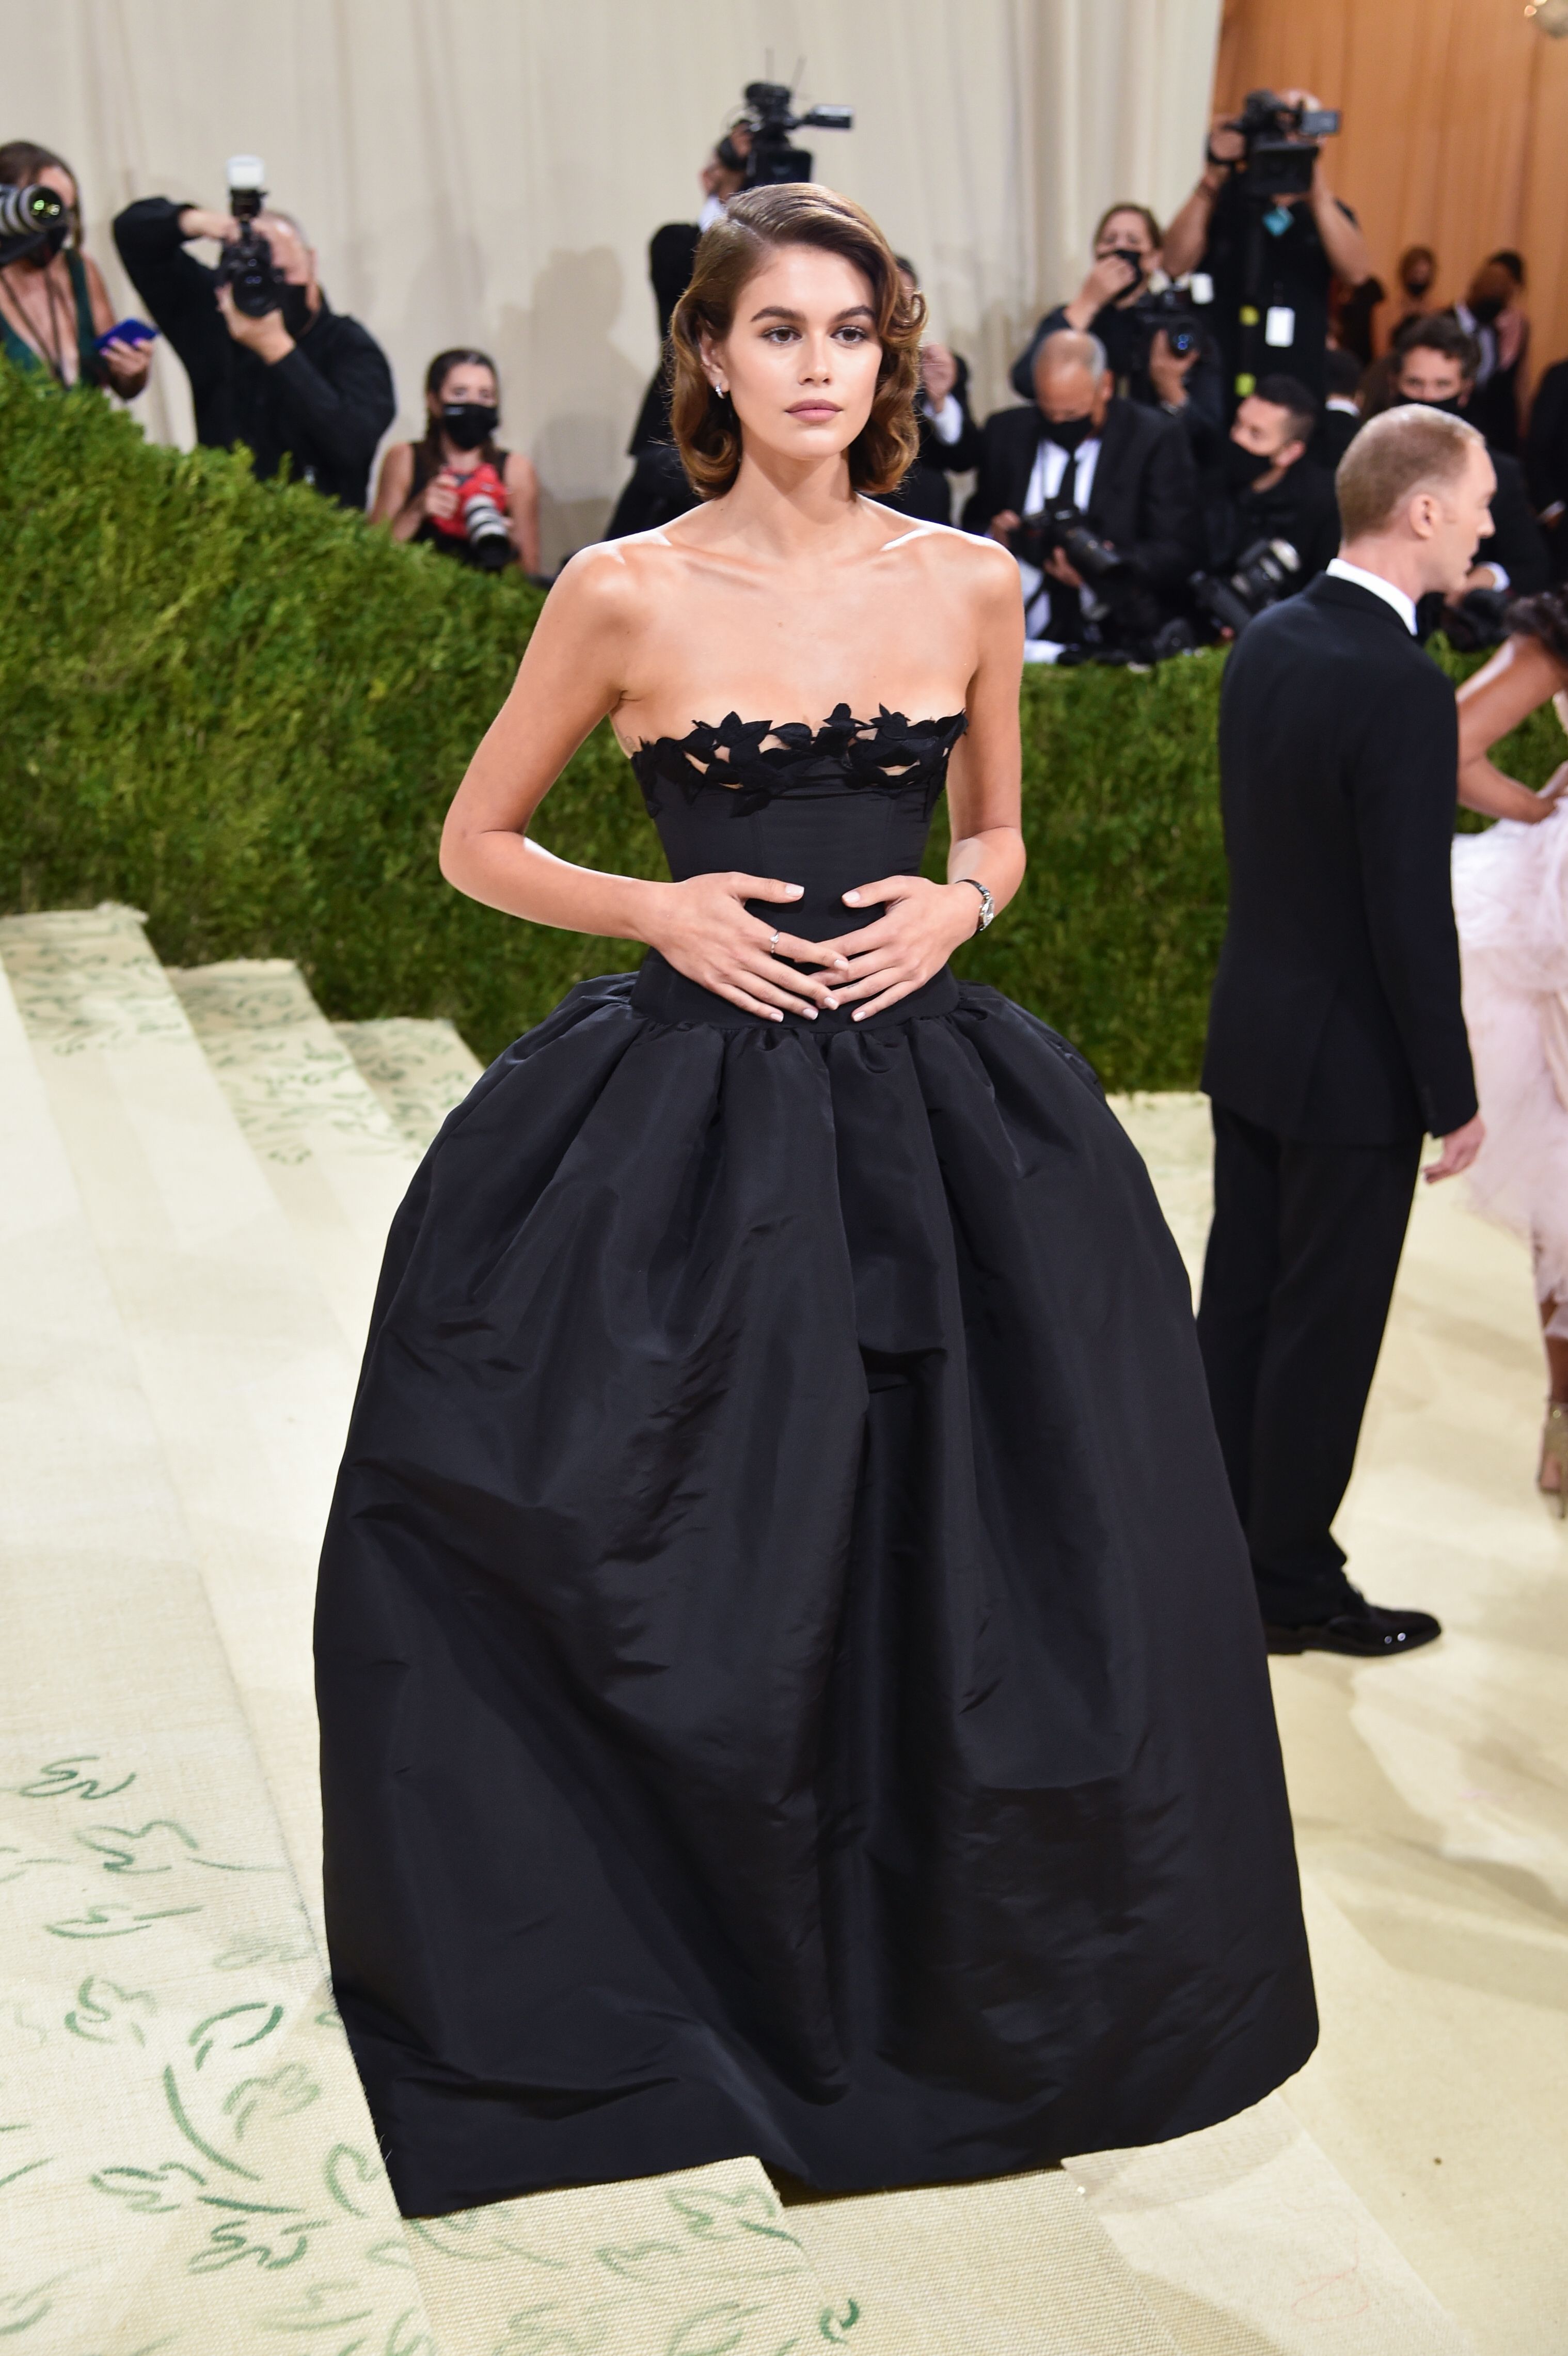 Braless Photos of Celebrities at the Met Gala Over the Years